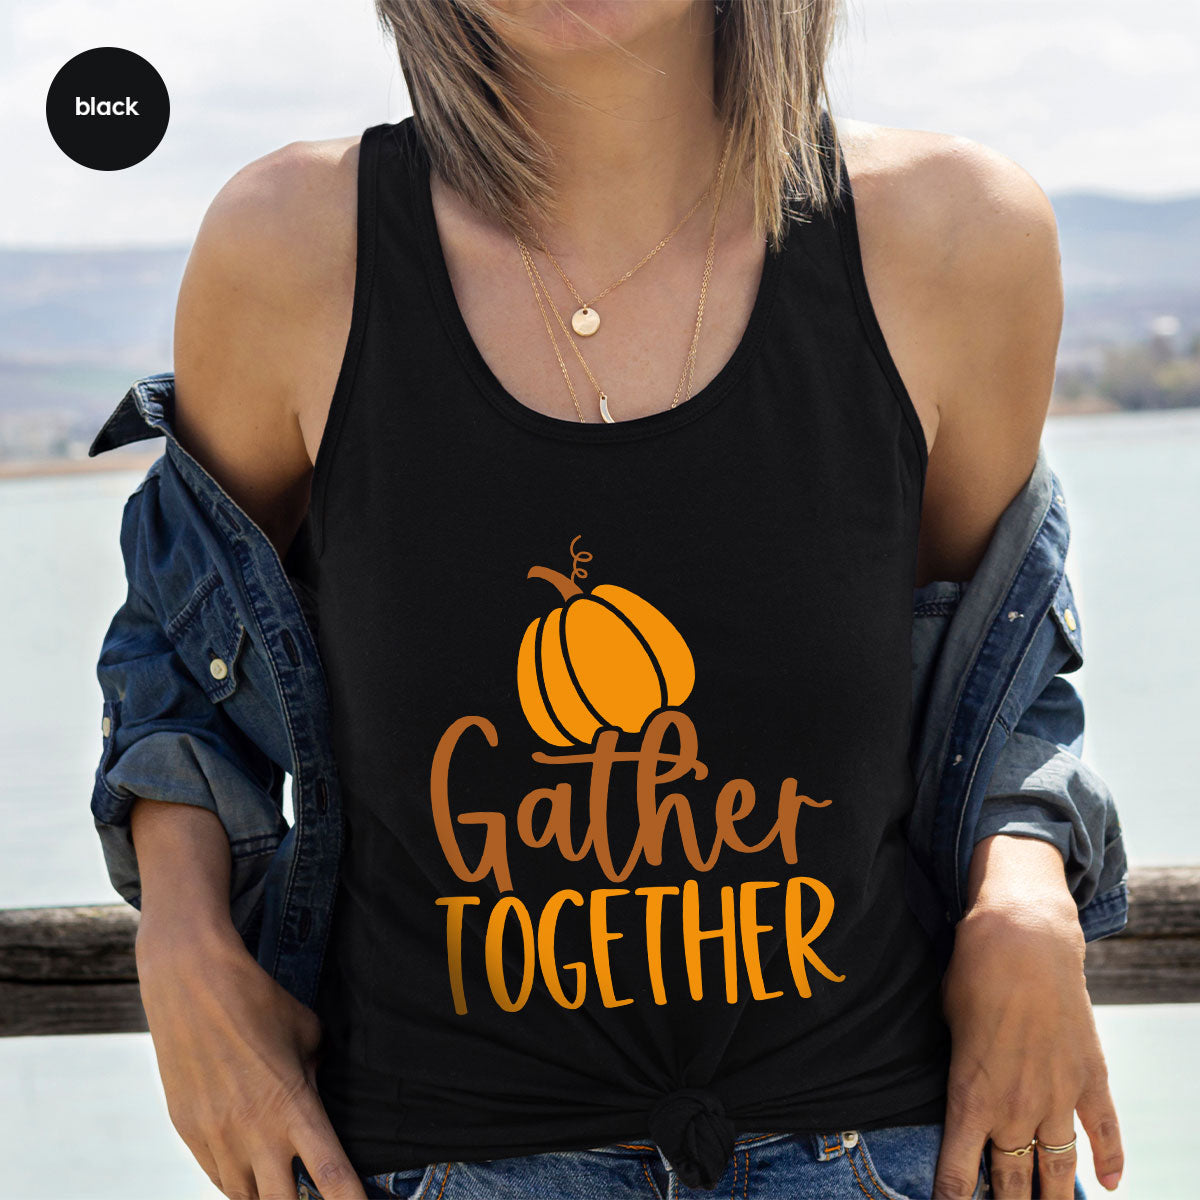 Fall Crewneck Sweatshirt, Thanksgiving Family Outfits, Pumpkin Graphic Tees, Autumn Clothing, Thankful Toddler Tshirt, Gather Together Shirt